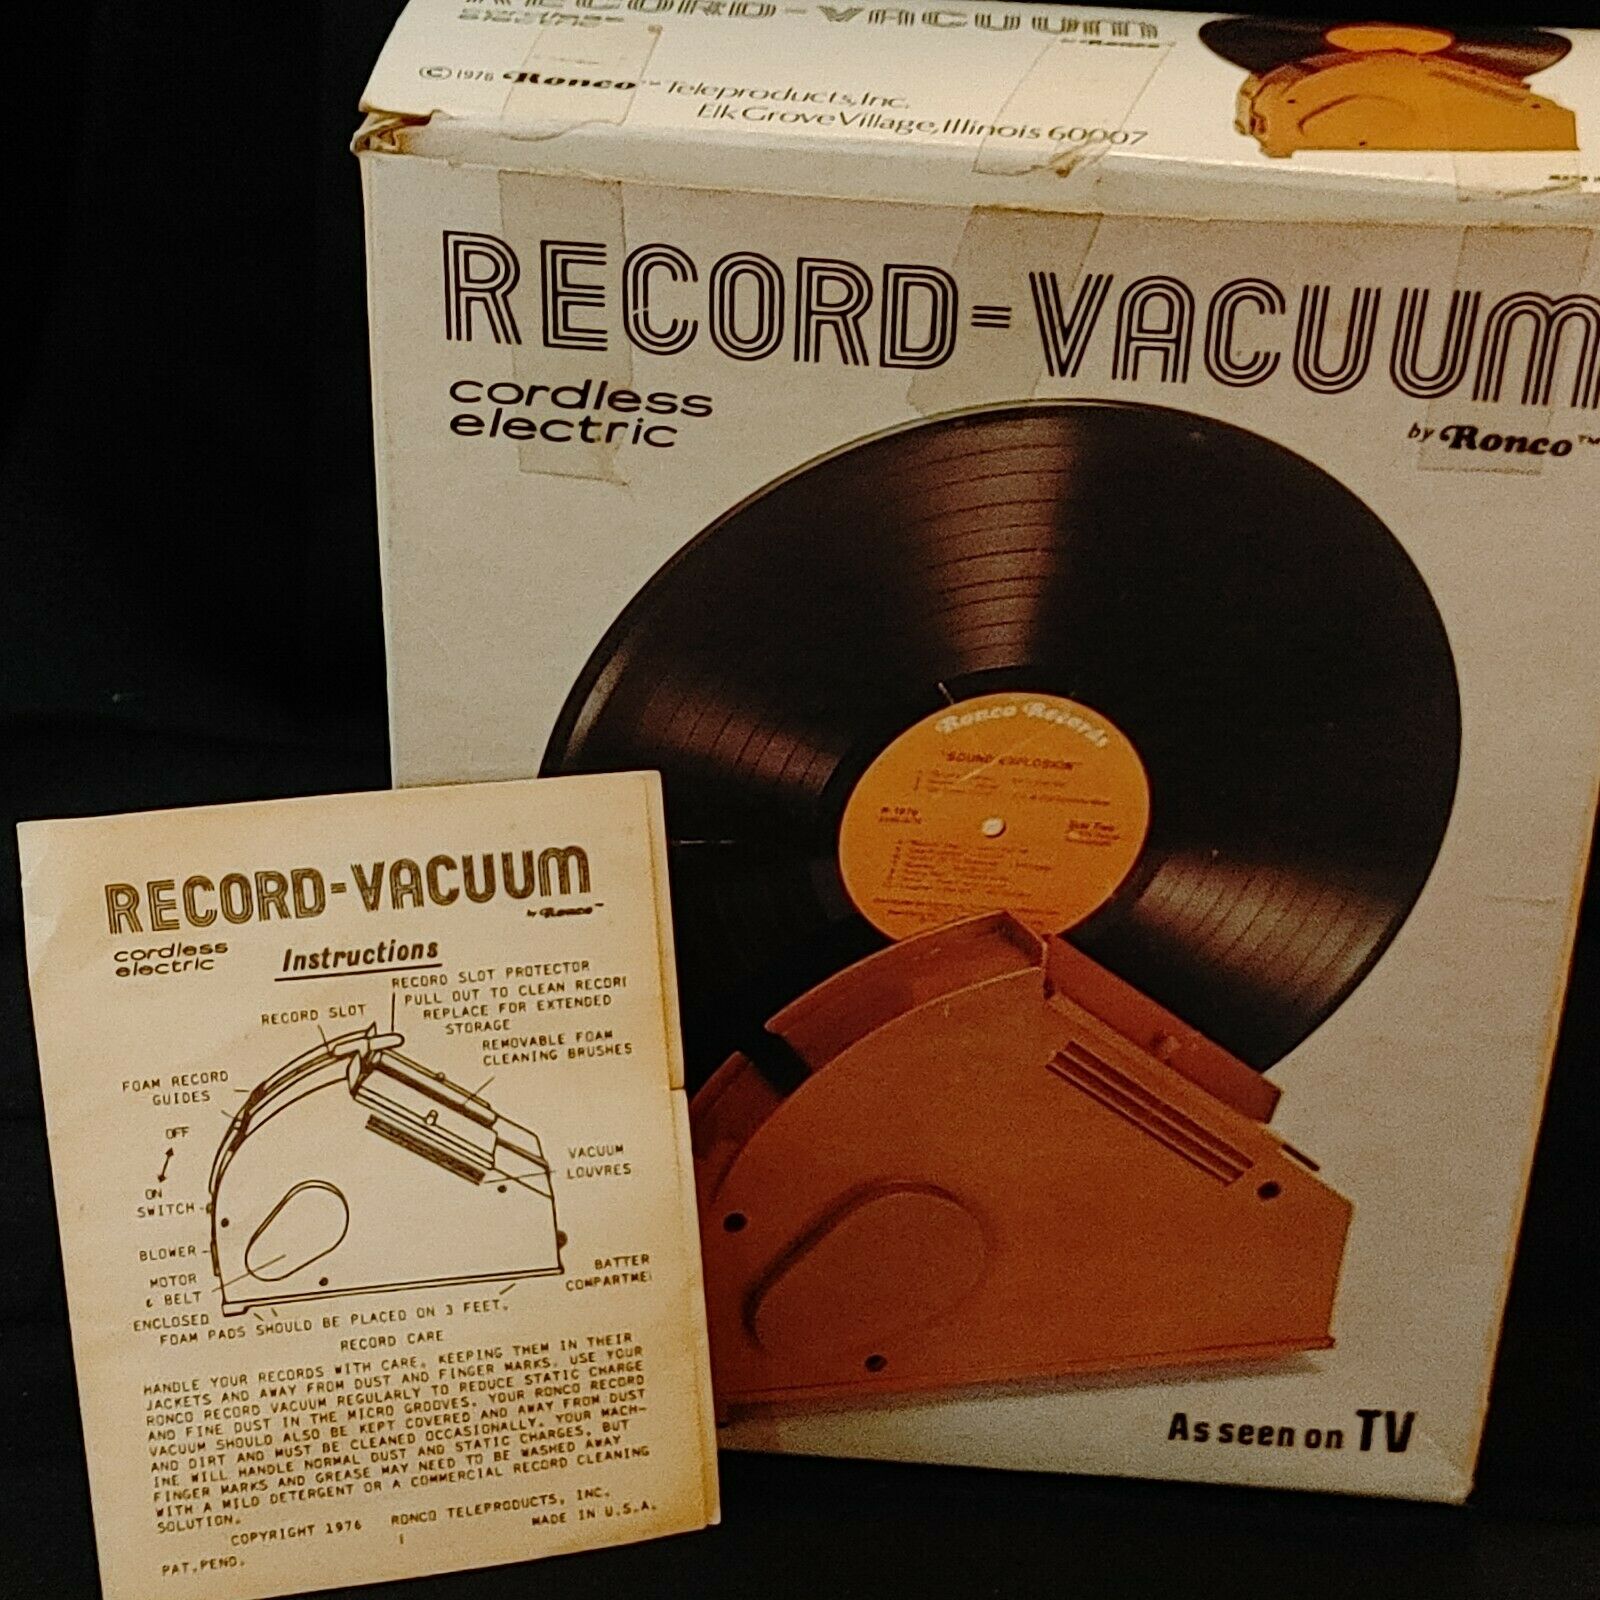 1976 70s Vinyl Record Vacuum Deep Cleaning Machine Brown Music Decor Untested